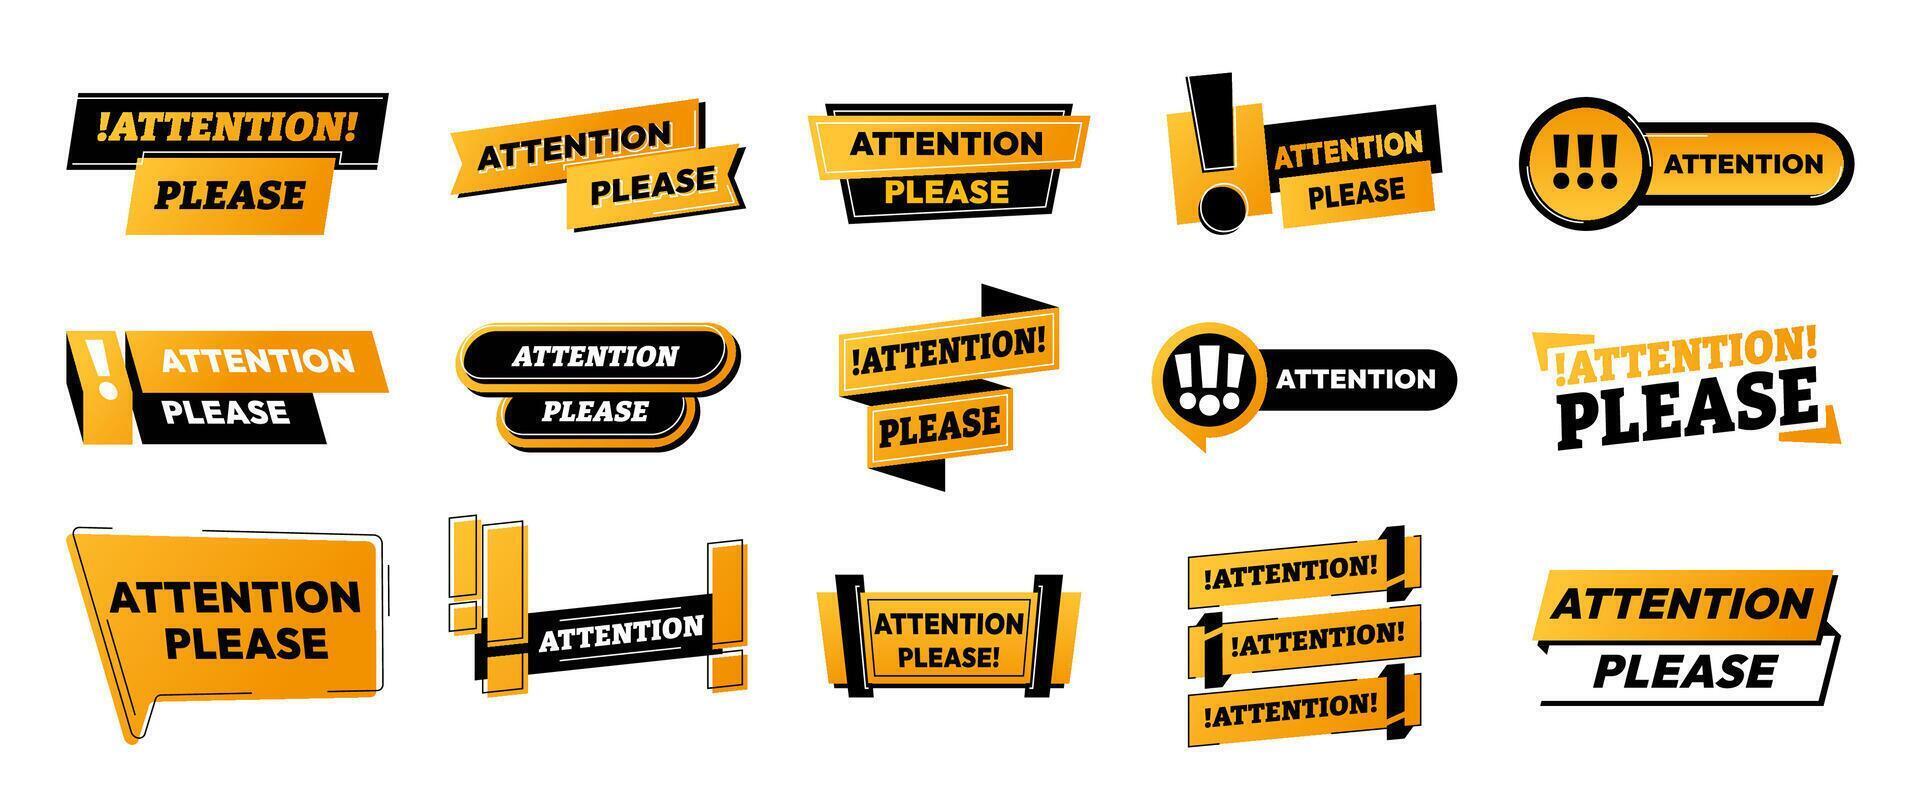 Attention banners. Warning danger alert sign, caution information and important note concept. Vector yellow danger and alert badges